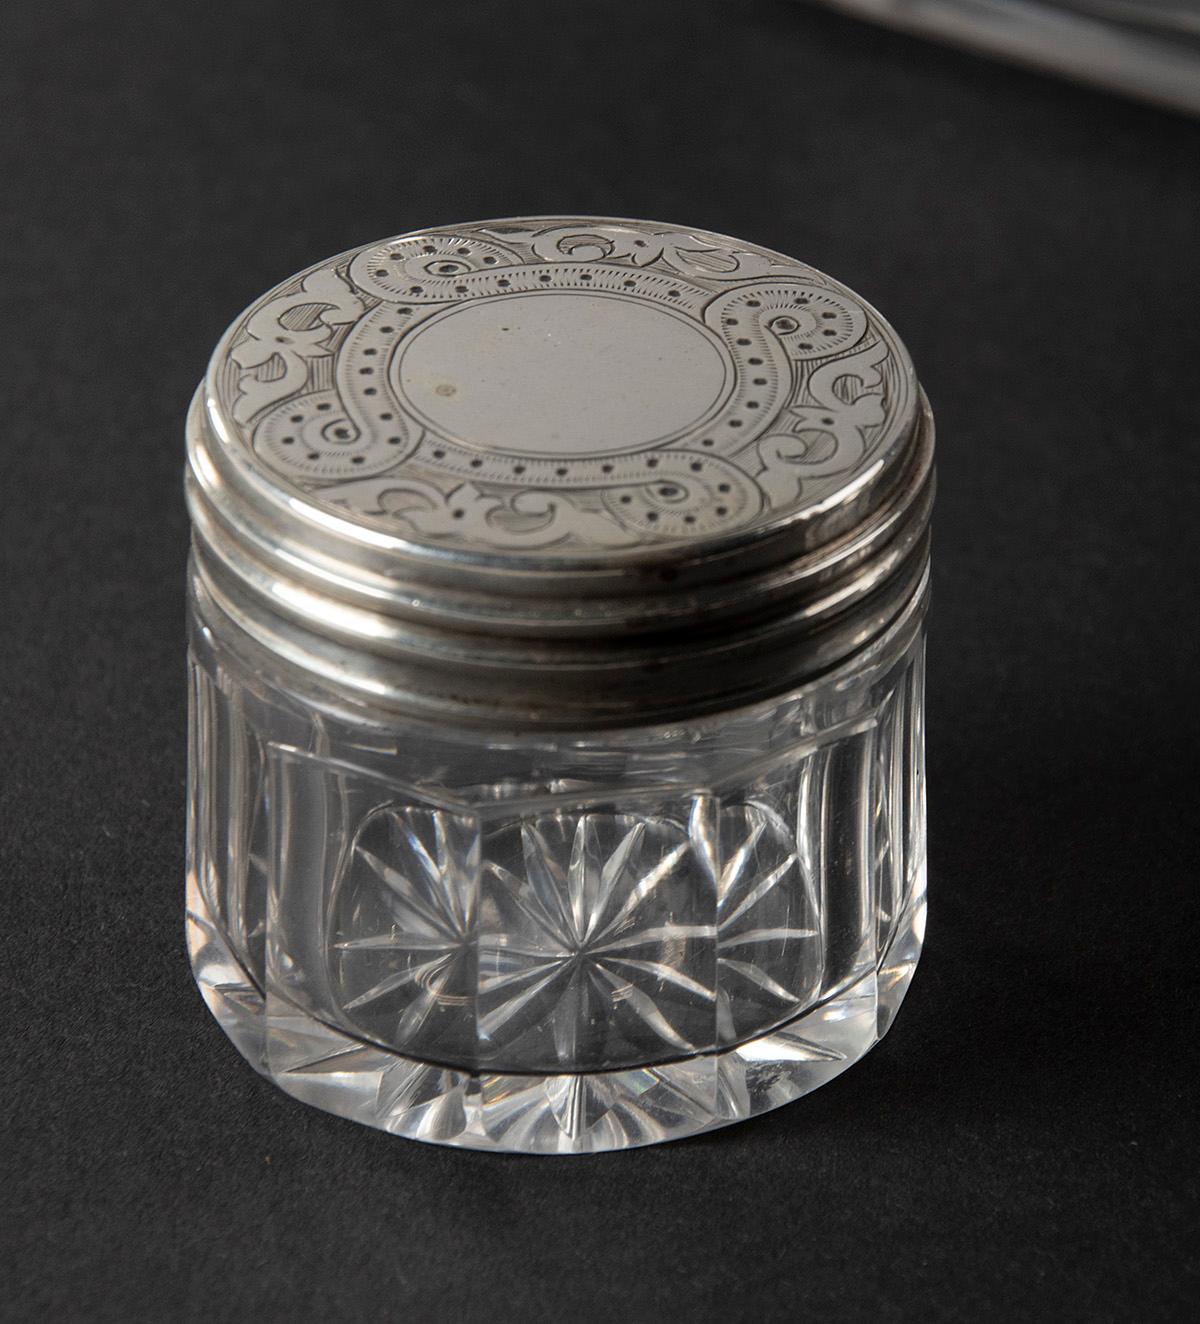 Vanity Case with Crystal Boxes and Sterling Silver Lids by George Betjemann 1870 For Sale 2